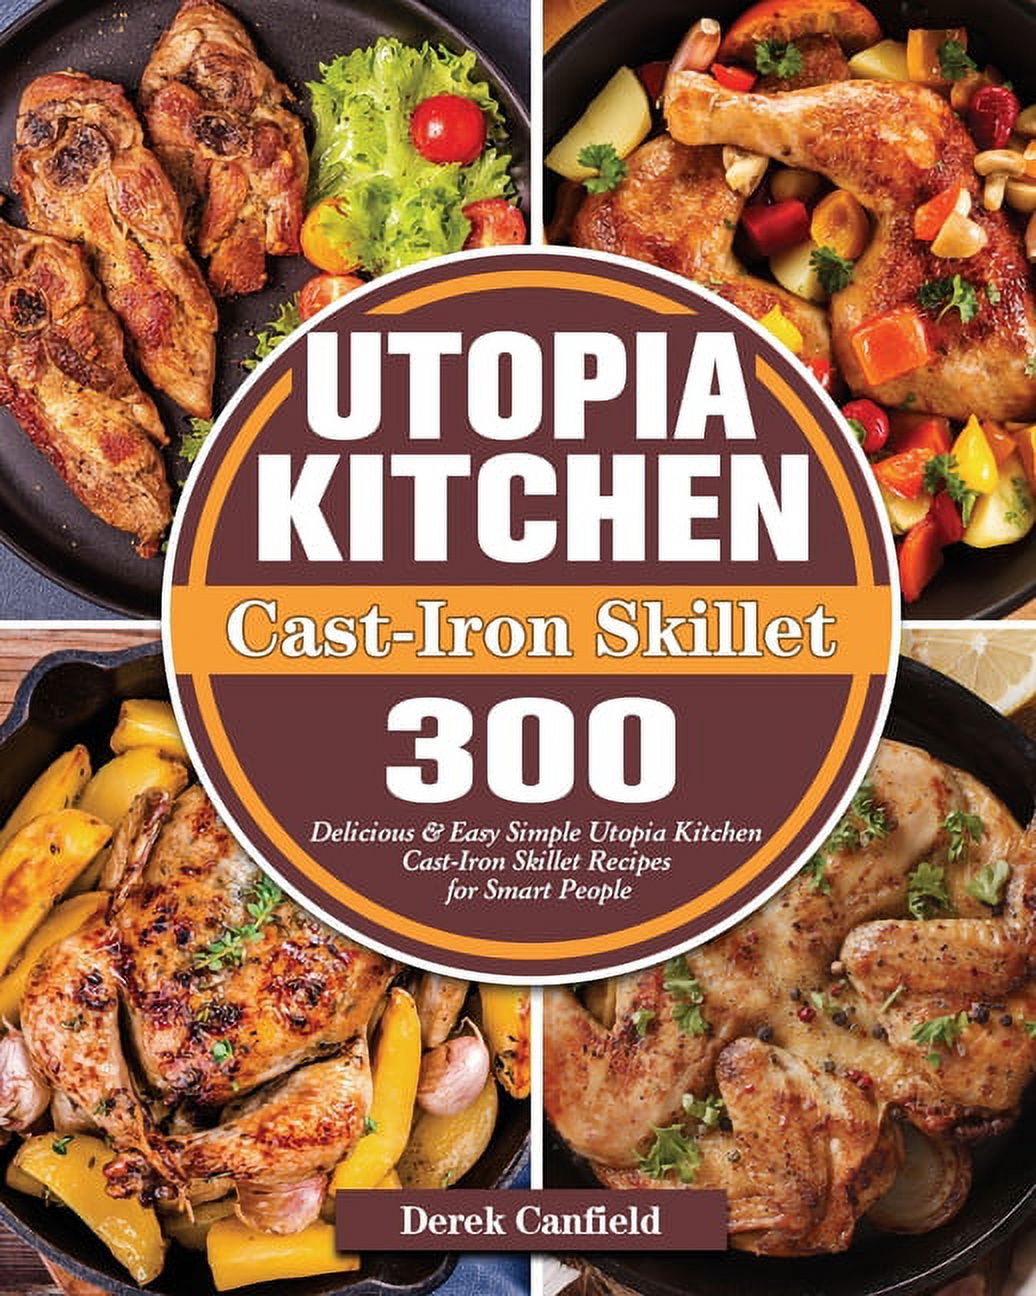 Utopia Kitchen Cast-Iron Skillet: 300 Delicious & Easy Simple Utopia Kitchen Cast-Iron Skillet Recipes for Smart People (Paperback) - image 1 of 1